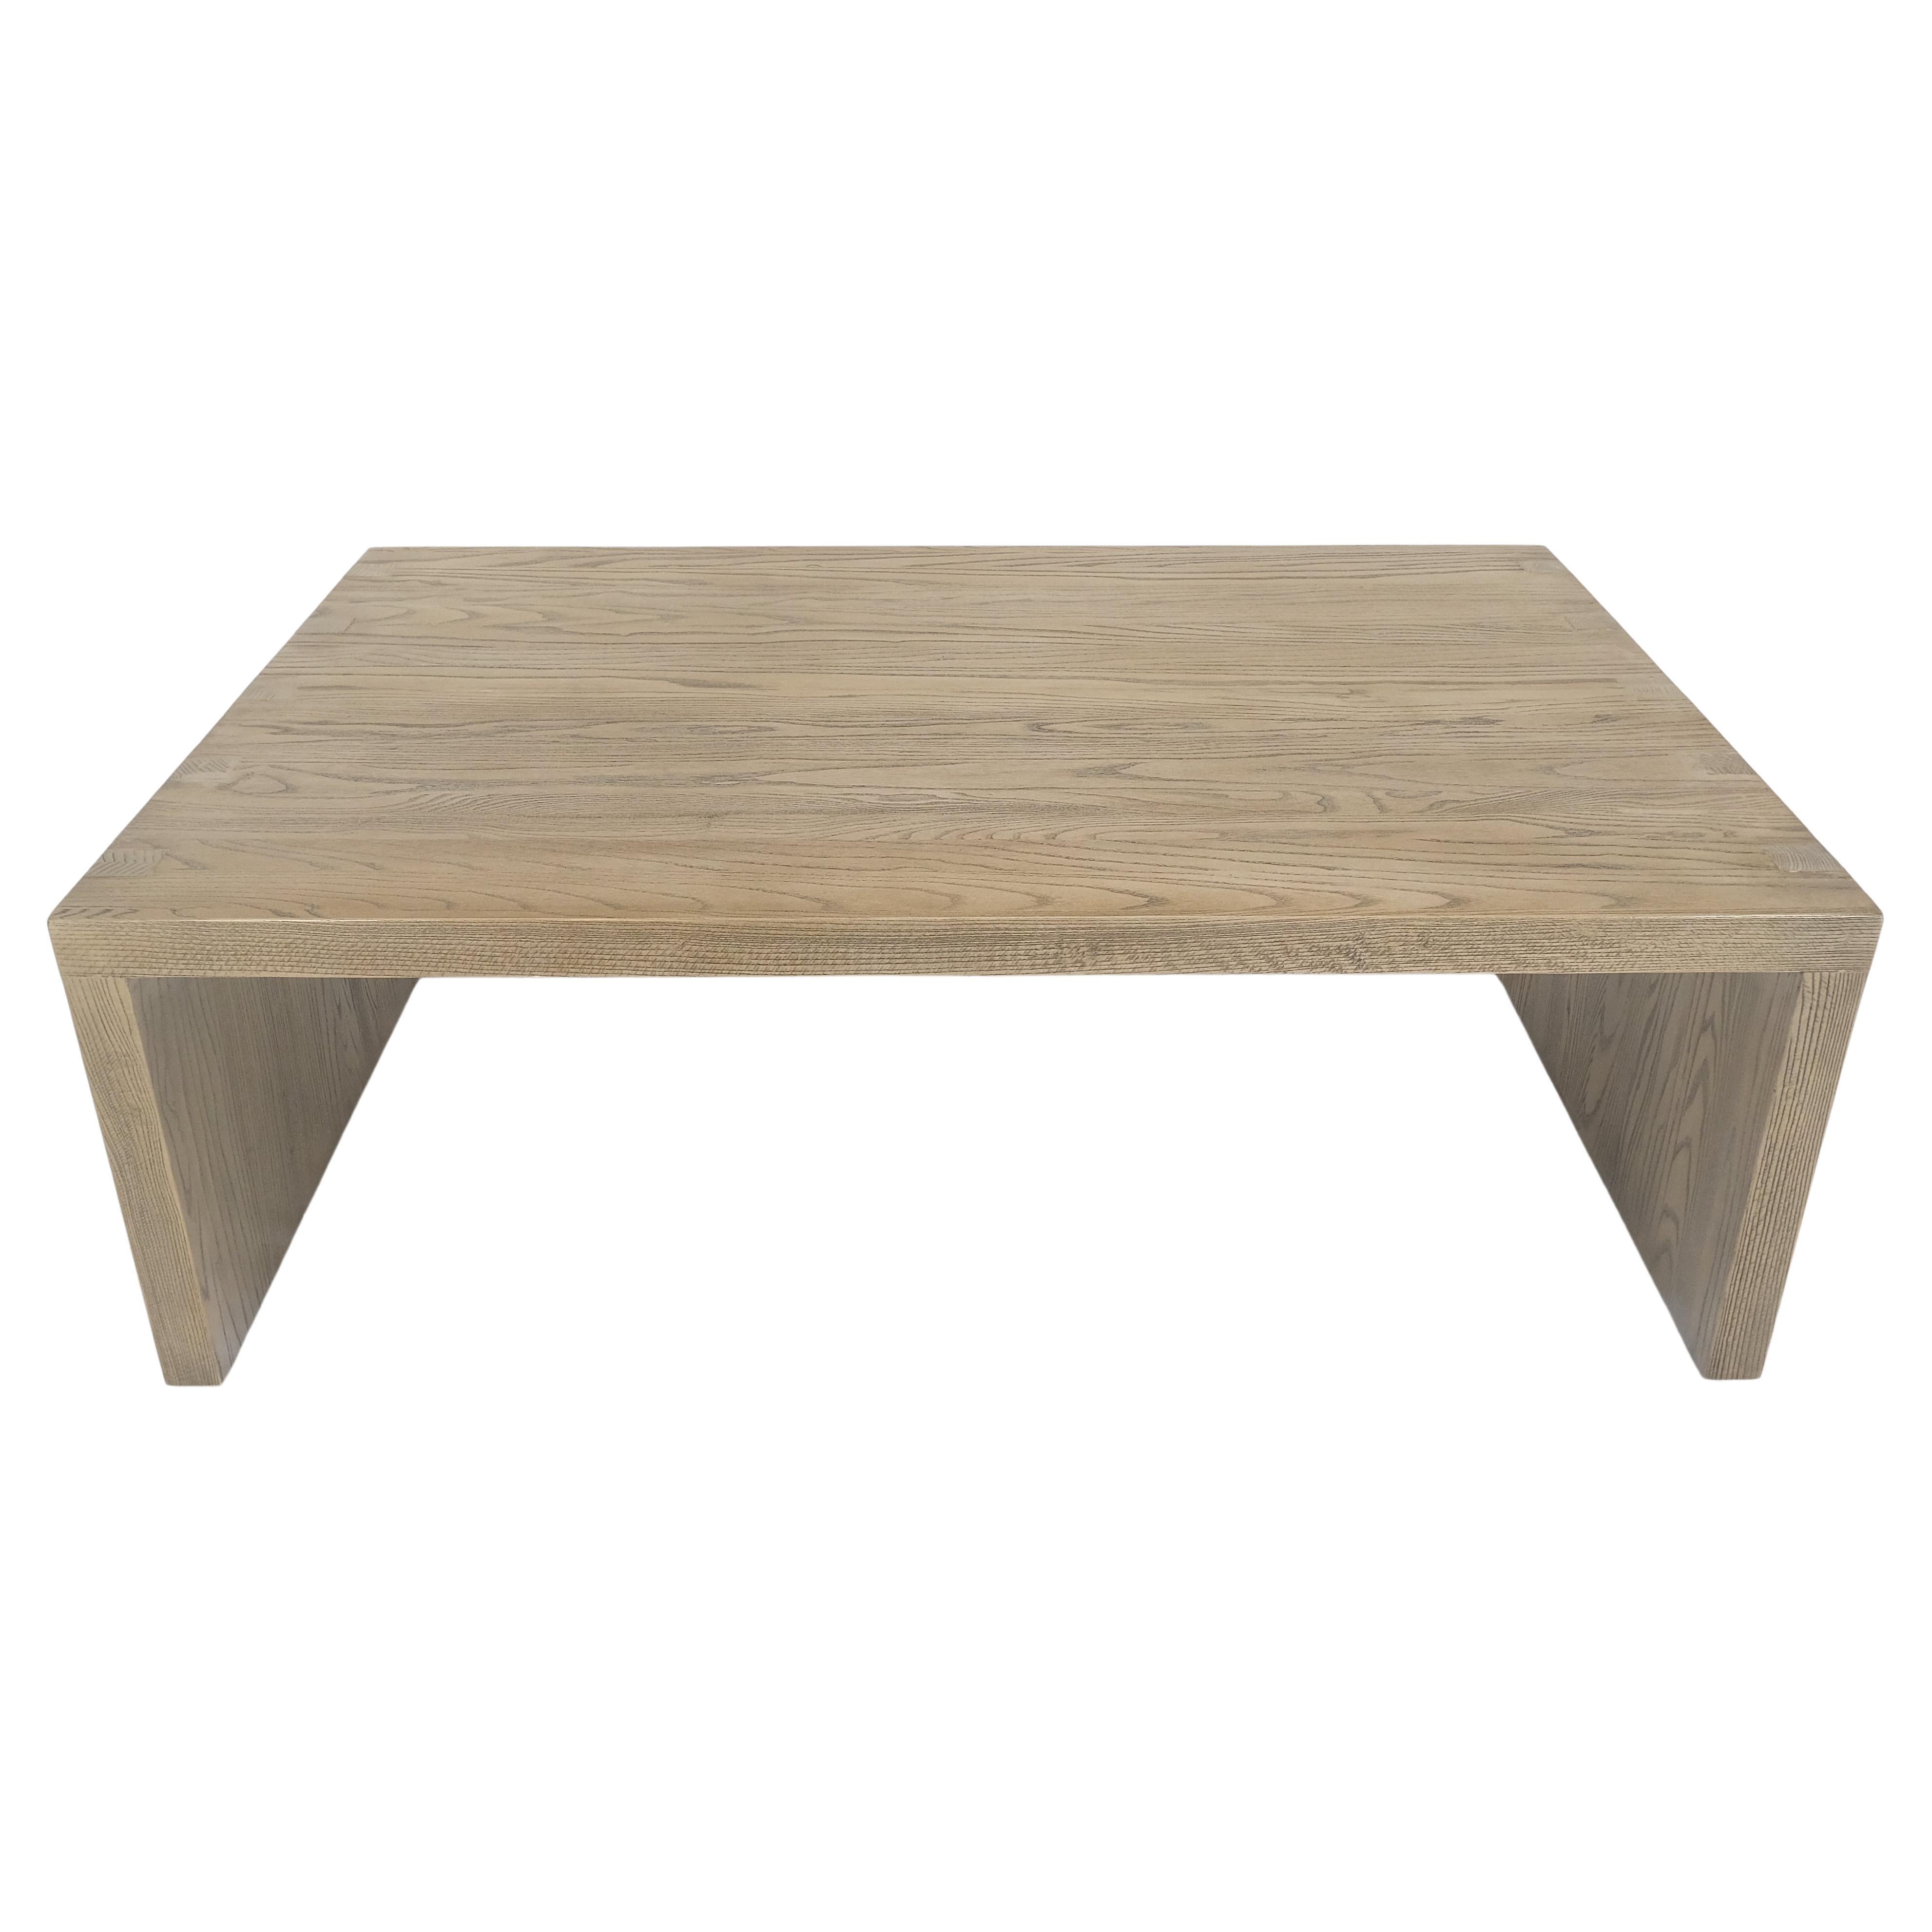 Large 40x60 Rectangle Cerused White Wash Solid Oak Dovetailed Coffee Table MINT! For Sale